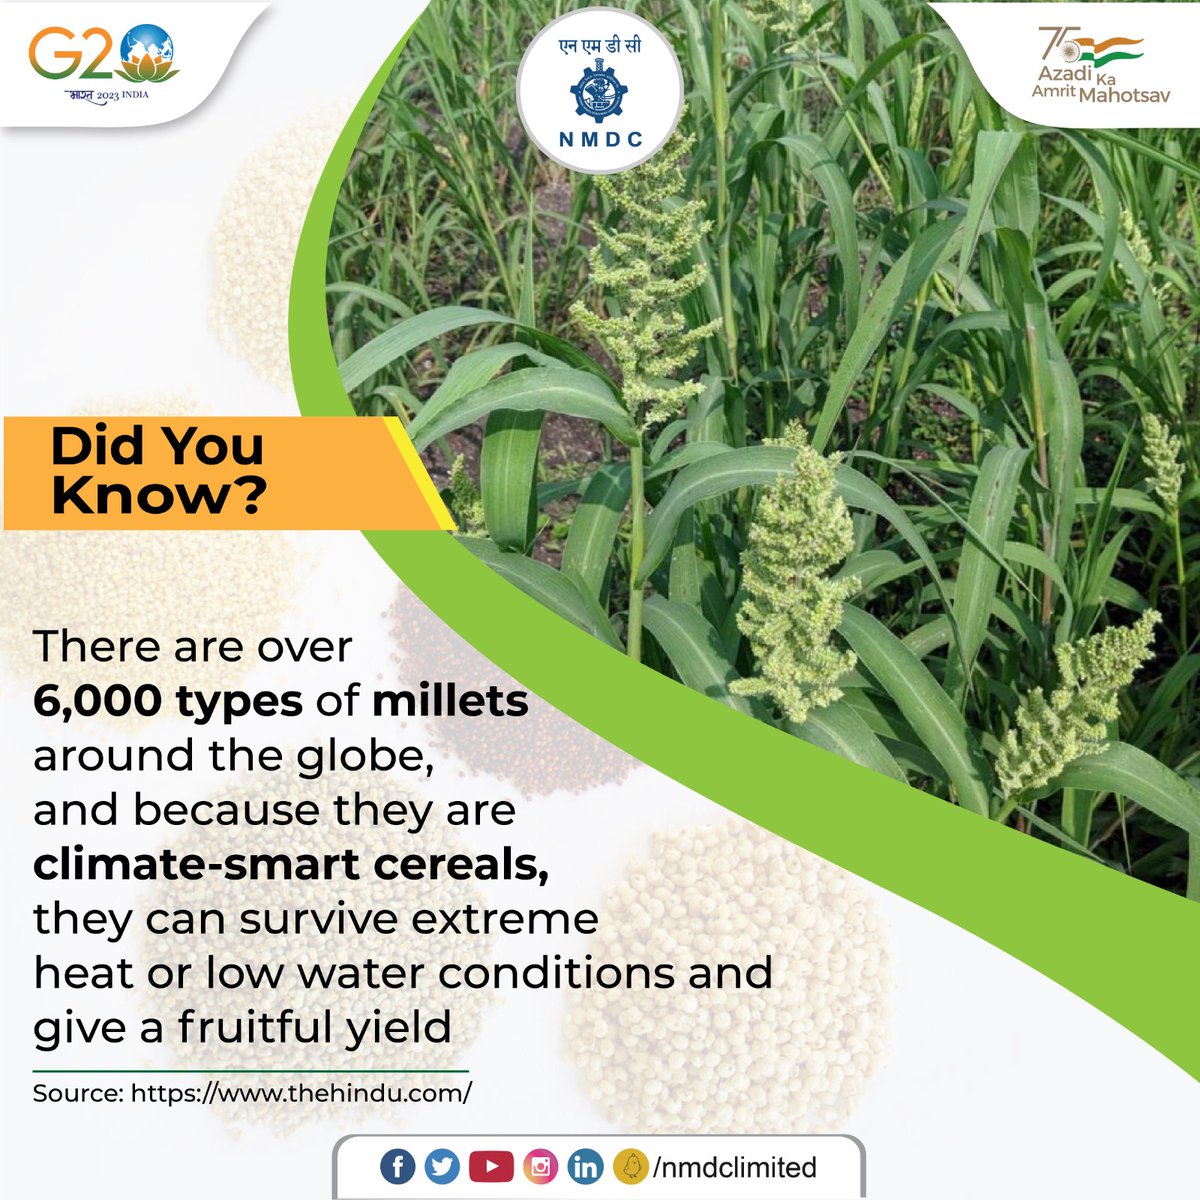 Millets provide a vital source of energy & protein to over a billion people who live in dry and semi-arid areas. They are easy to procure and nutrition-rich, which makes them a genuine superfood.

#NMDC #Milletfacts #MilletsofIndia #InternationalYearOfMillets